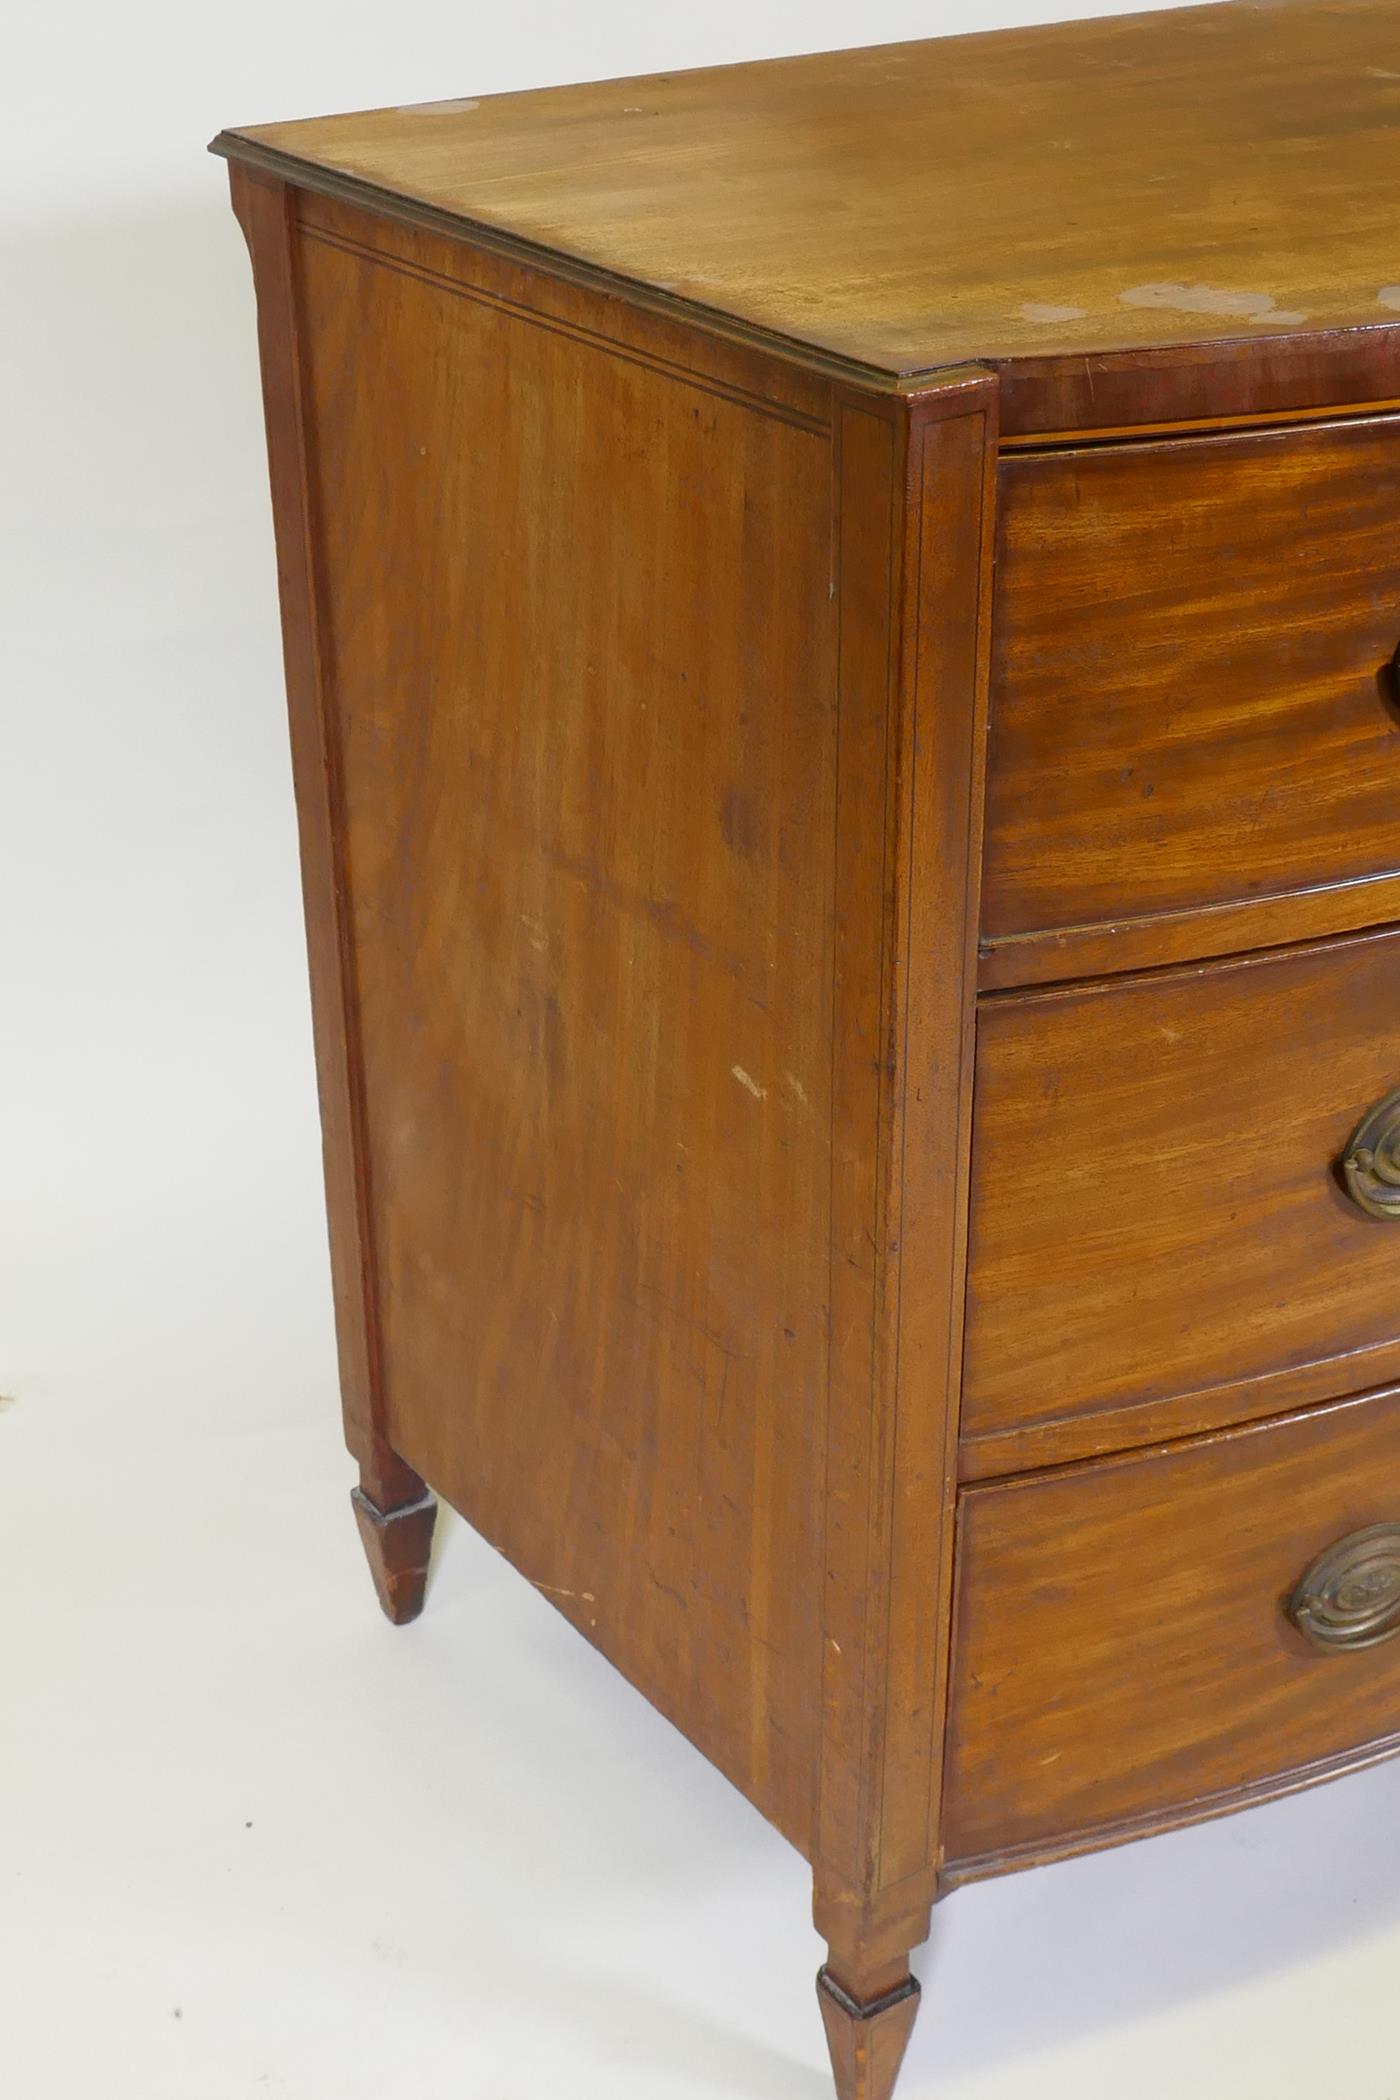 A C19th mahogany Sheraton style bow front chest of three long drawers with brass plate handles, - Image 5 of 9